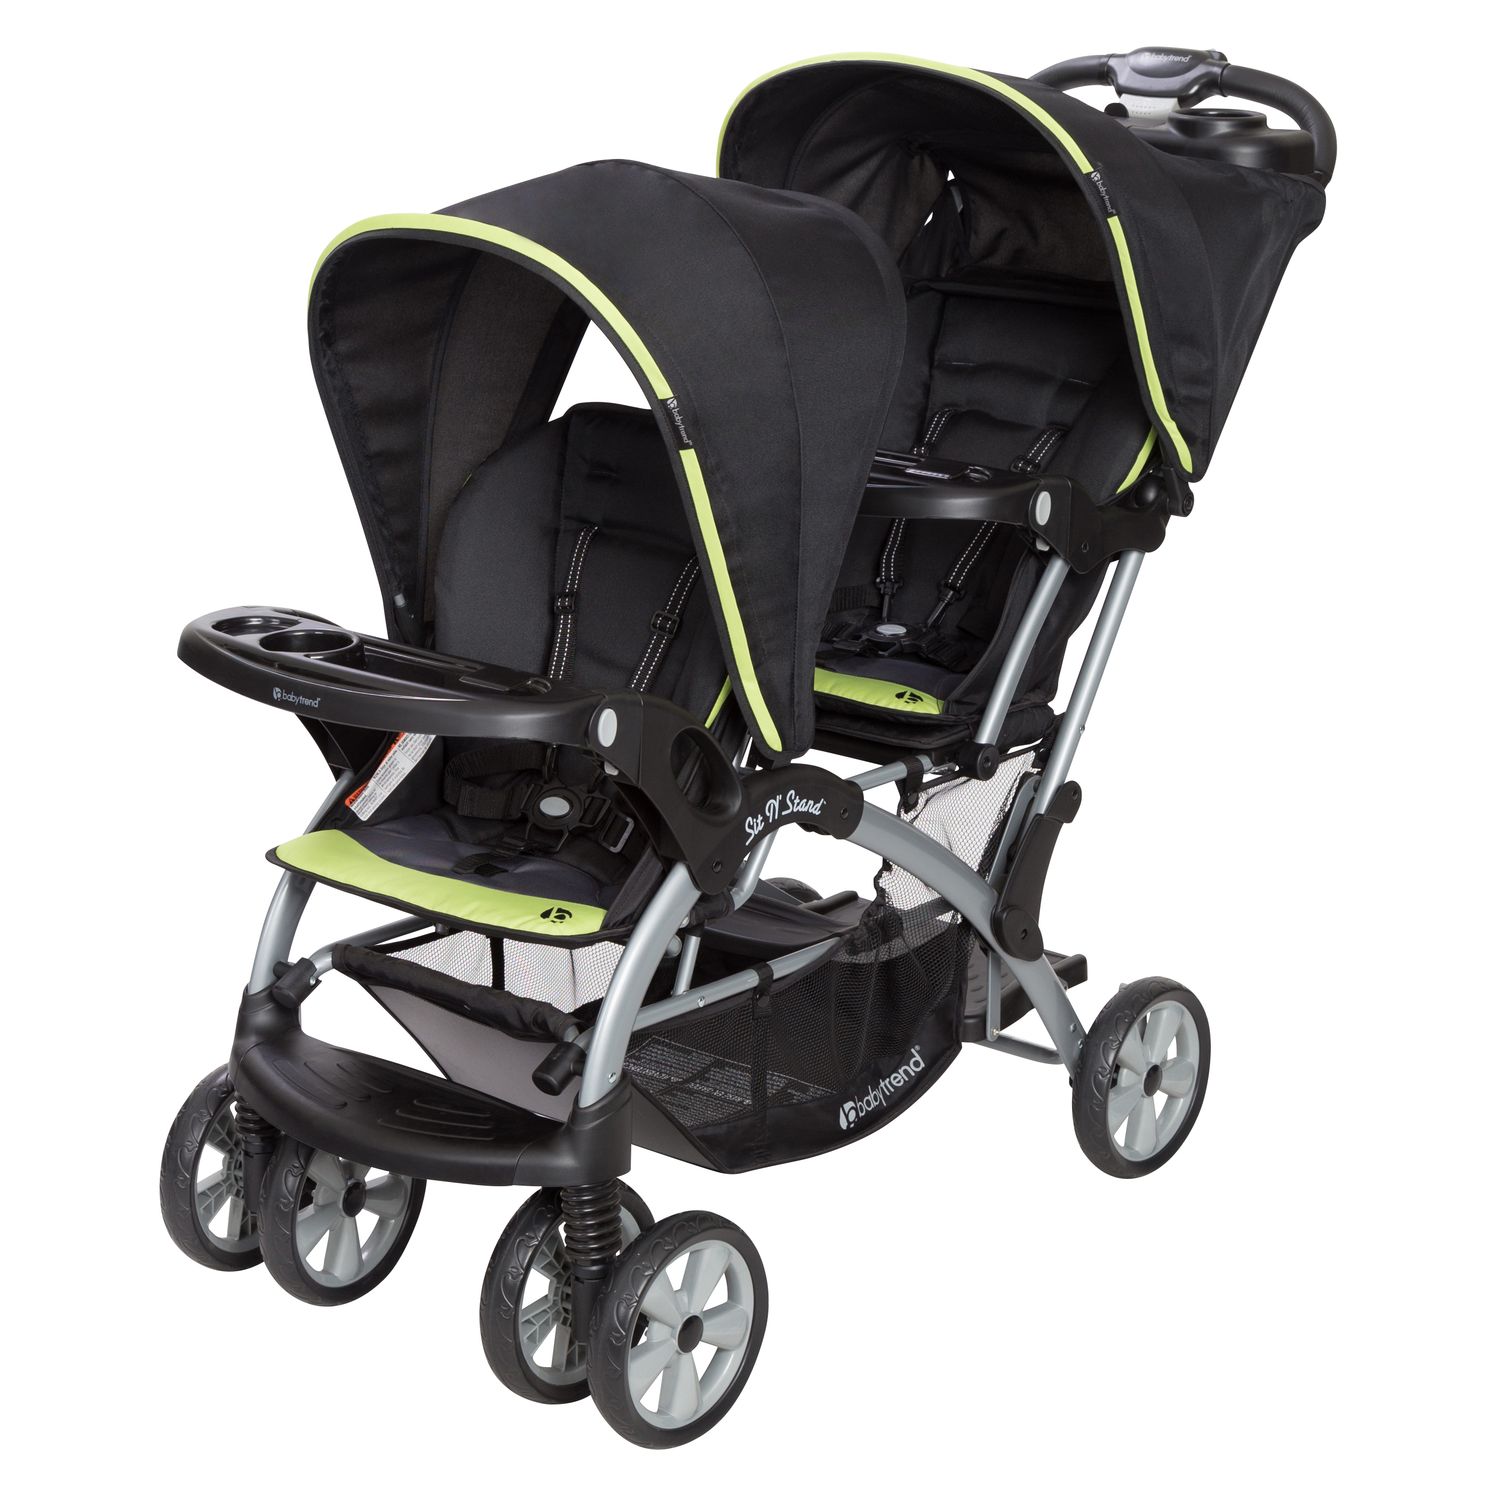 graco duoglider double stroller car seat